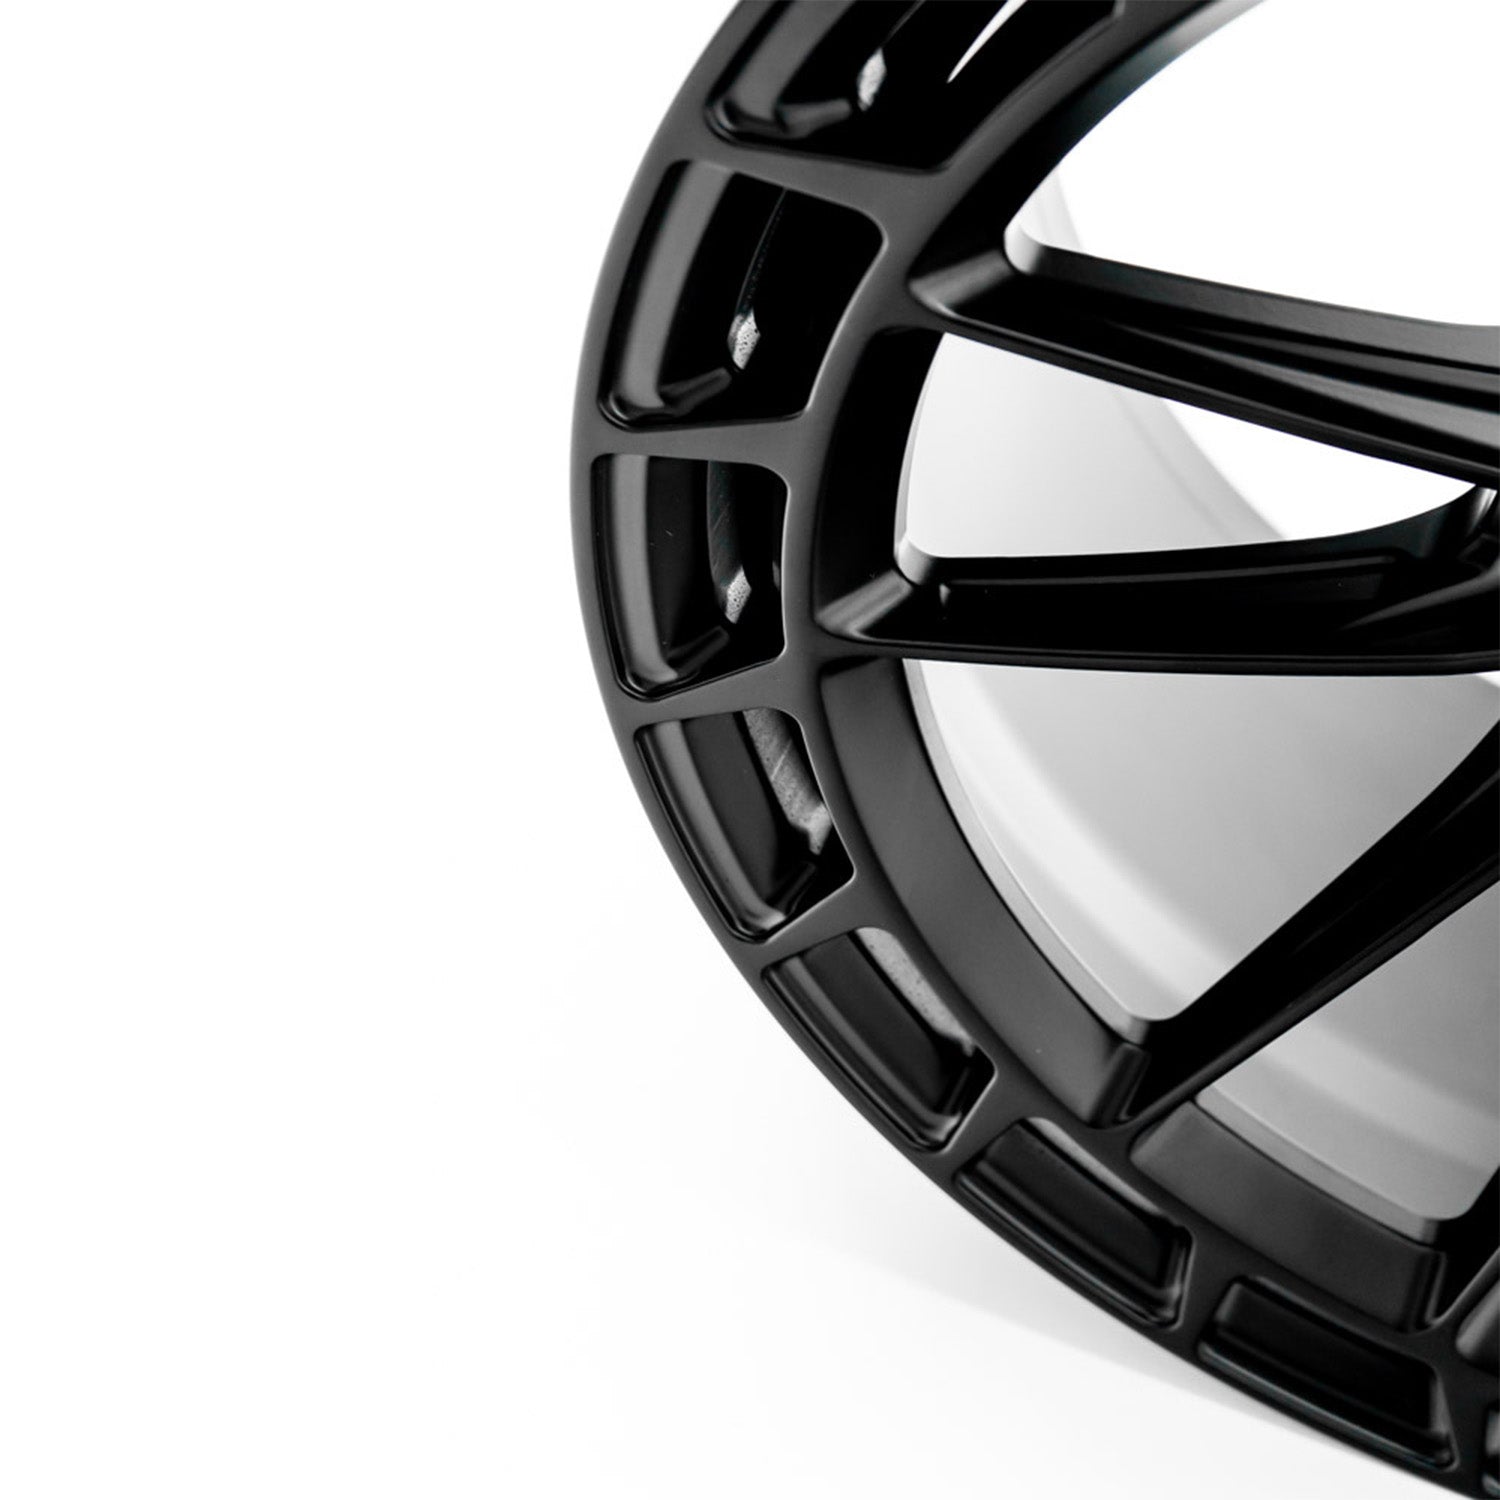 Bola FP3 19" Forged Alloy Wheels In Satin Black - Wider Rear